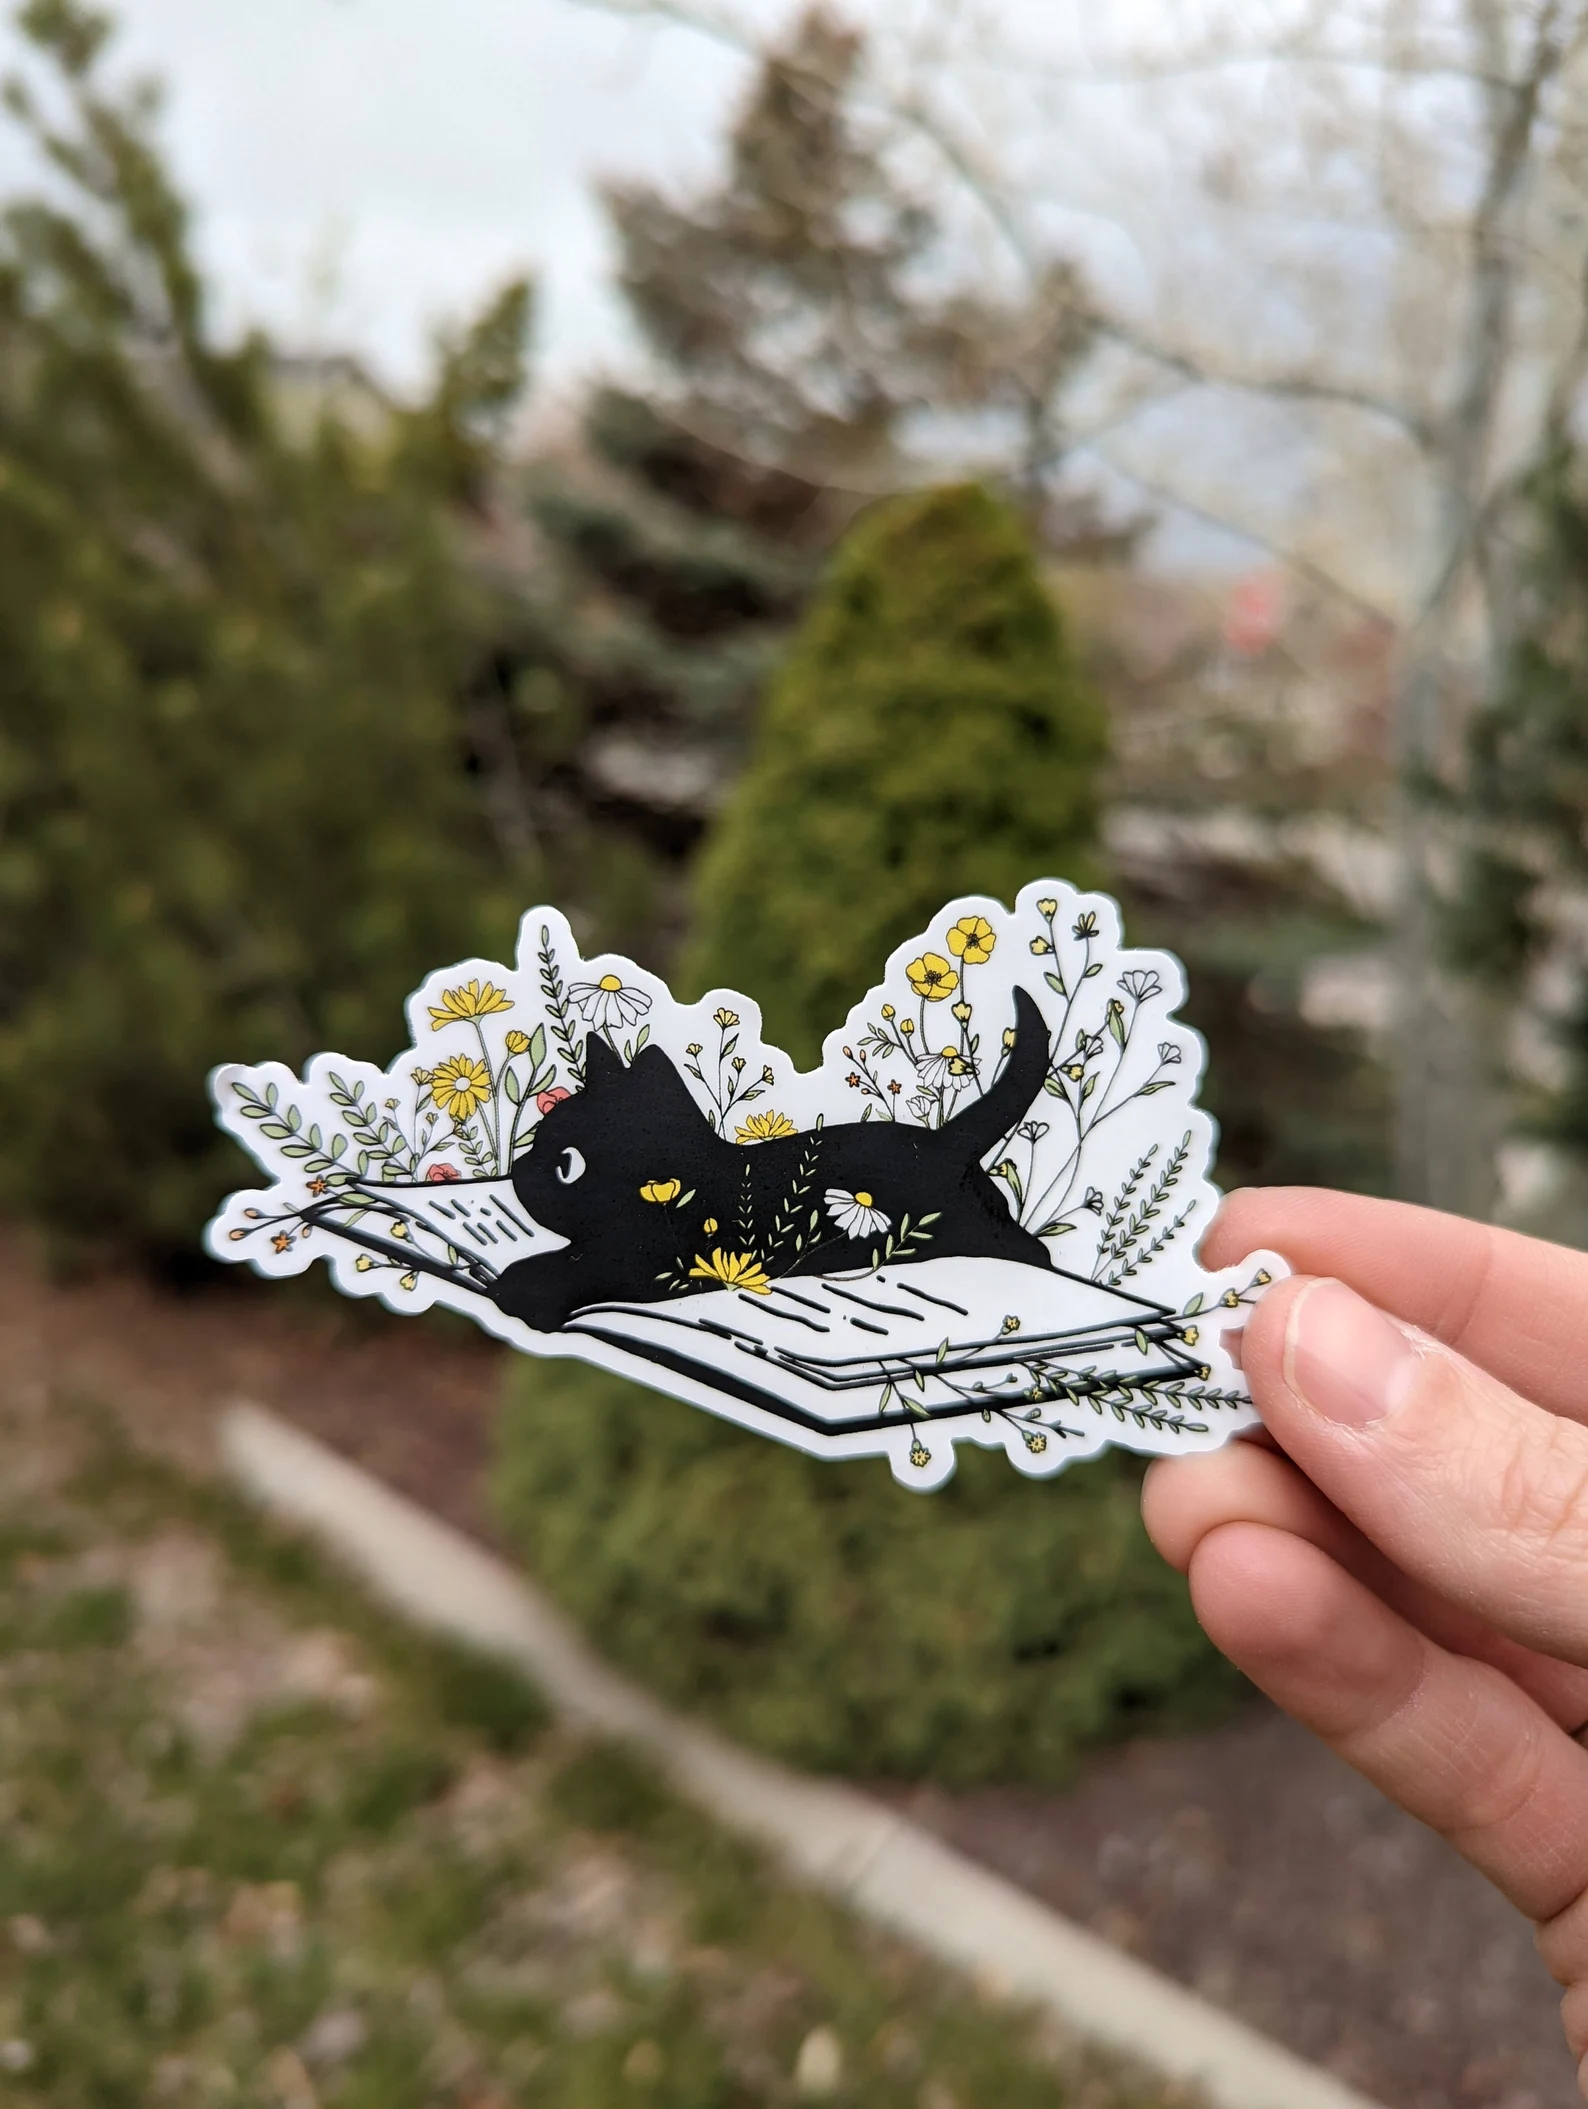 A sticker featuring a black cat laying on an open book surrounded by flowers